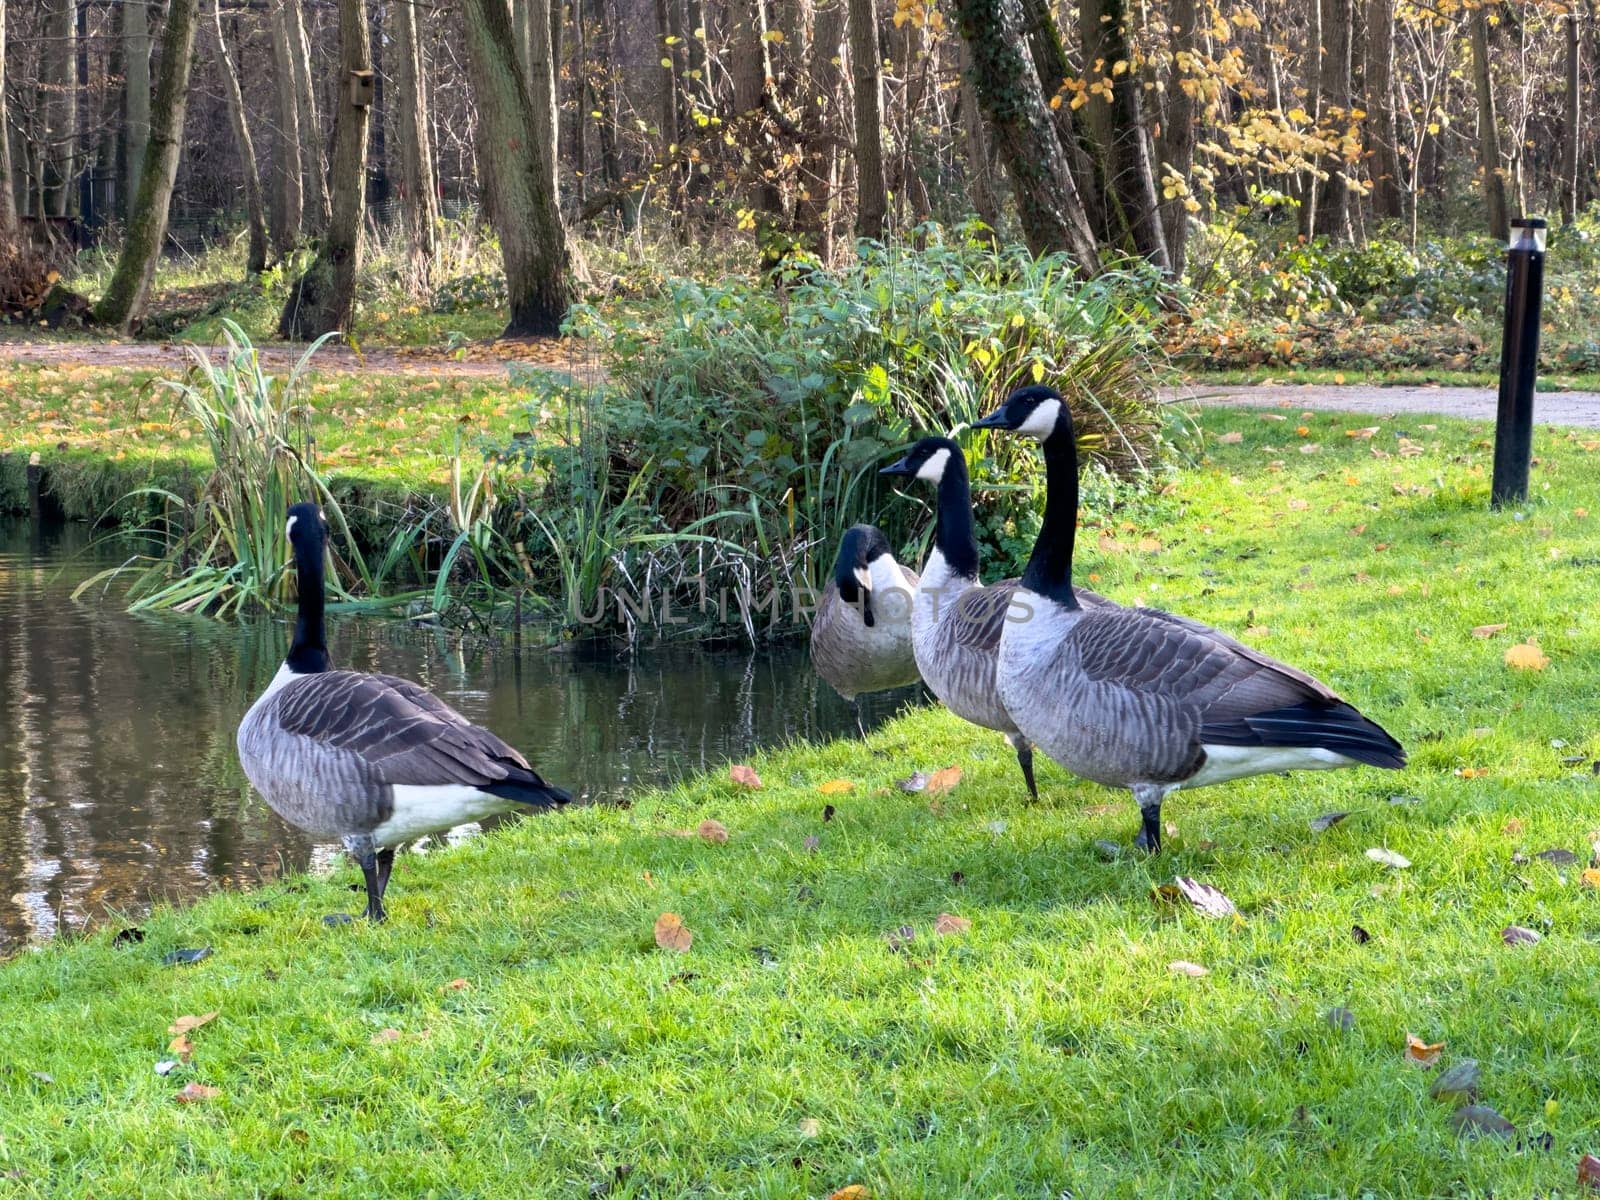 Bar Headed Gooses on the grass in a park next to the lake